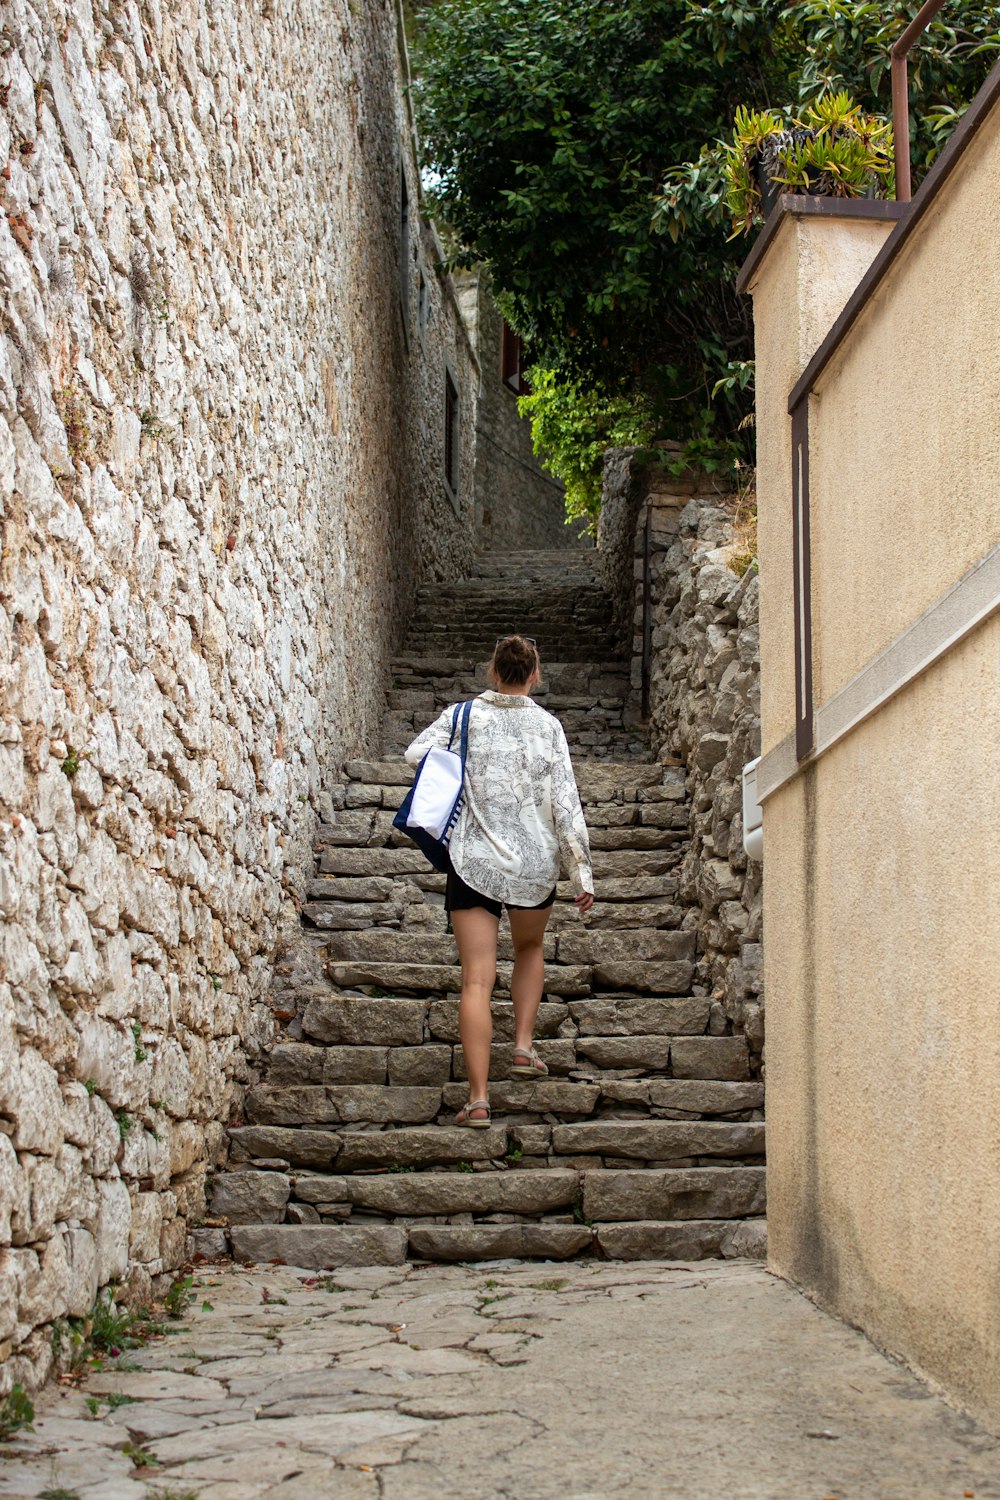 a person walking up a stone staircase